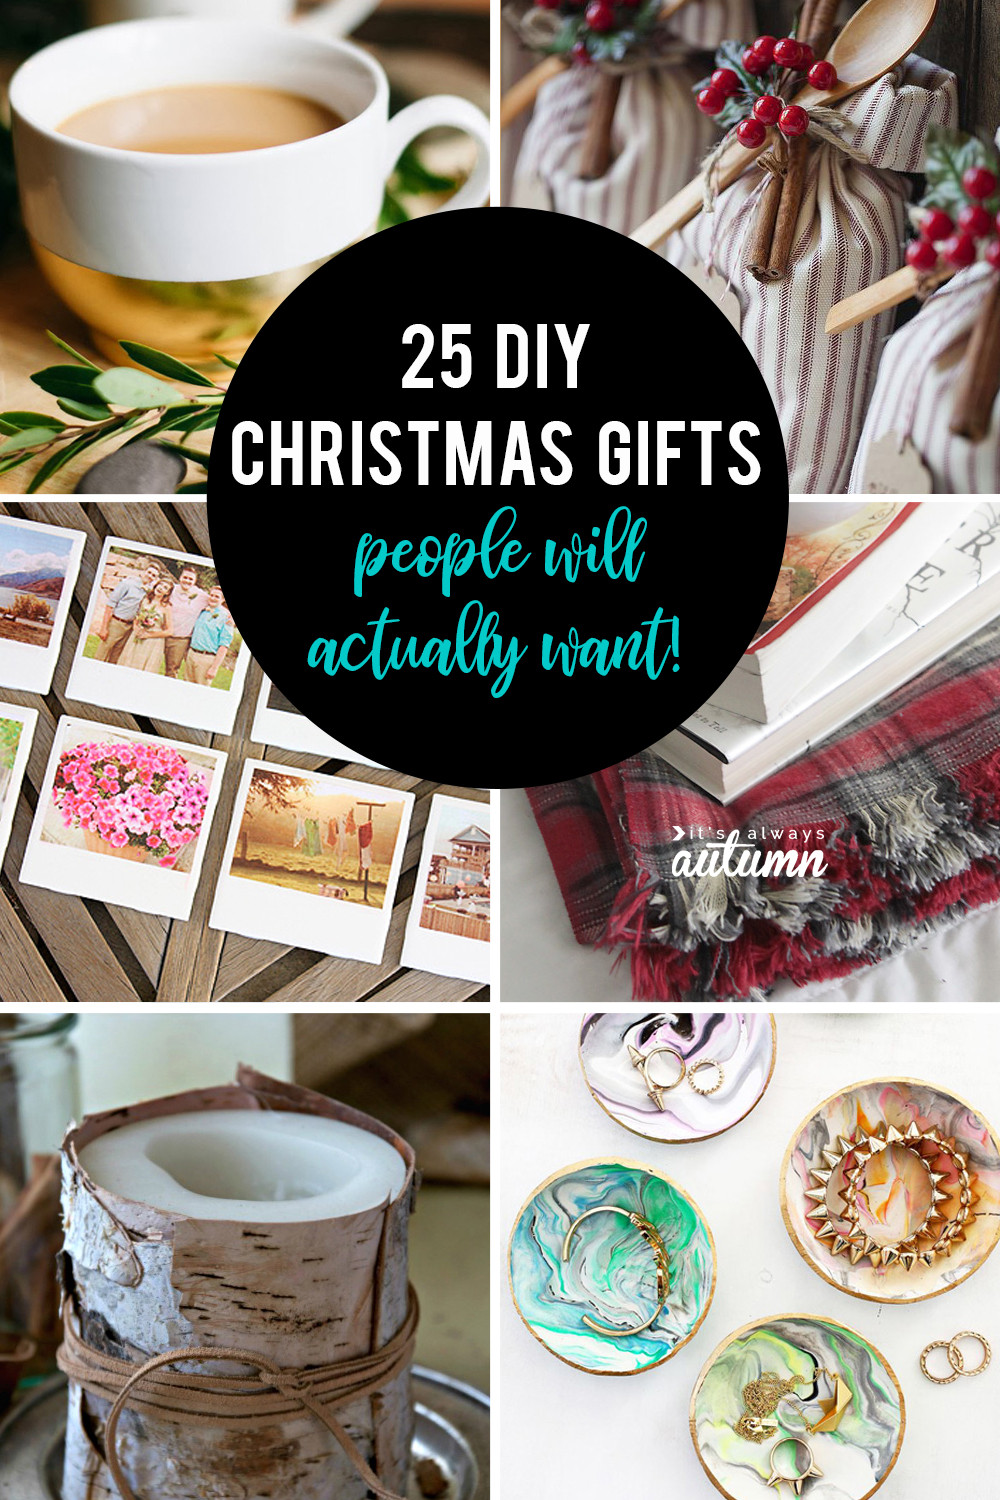 Homemade Gift Ideas For Christmas
 25 amazing DIY ts people will actually want It s